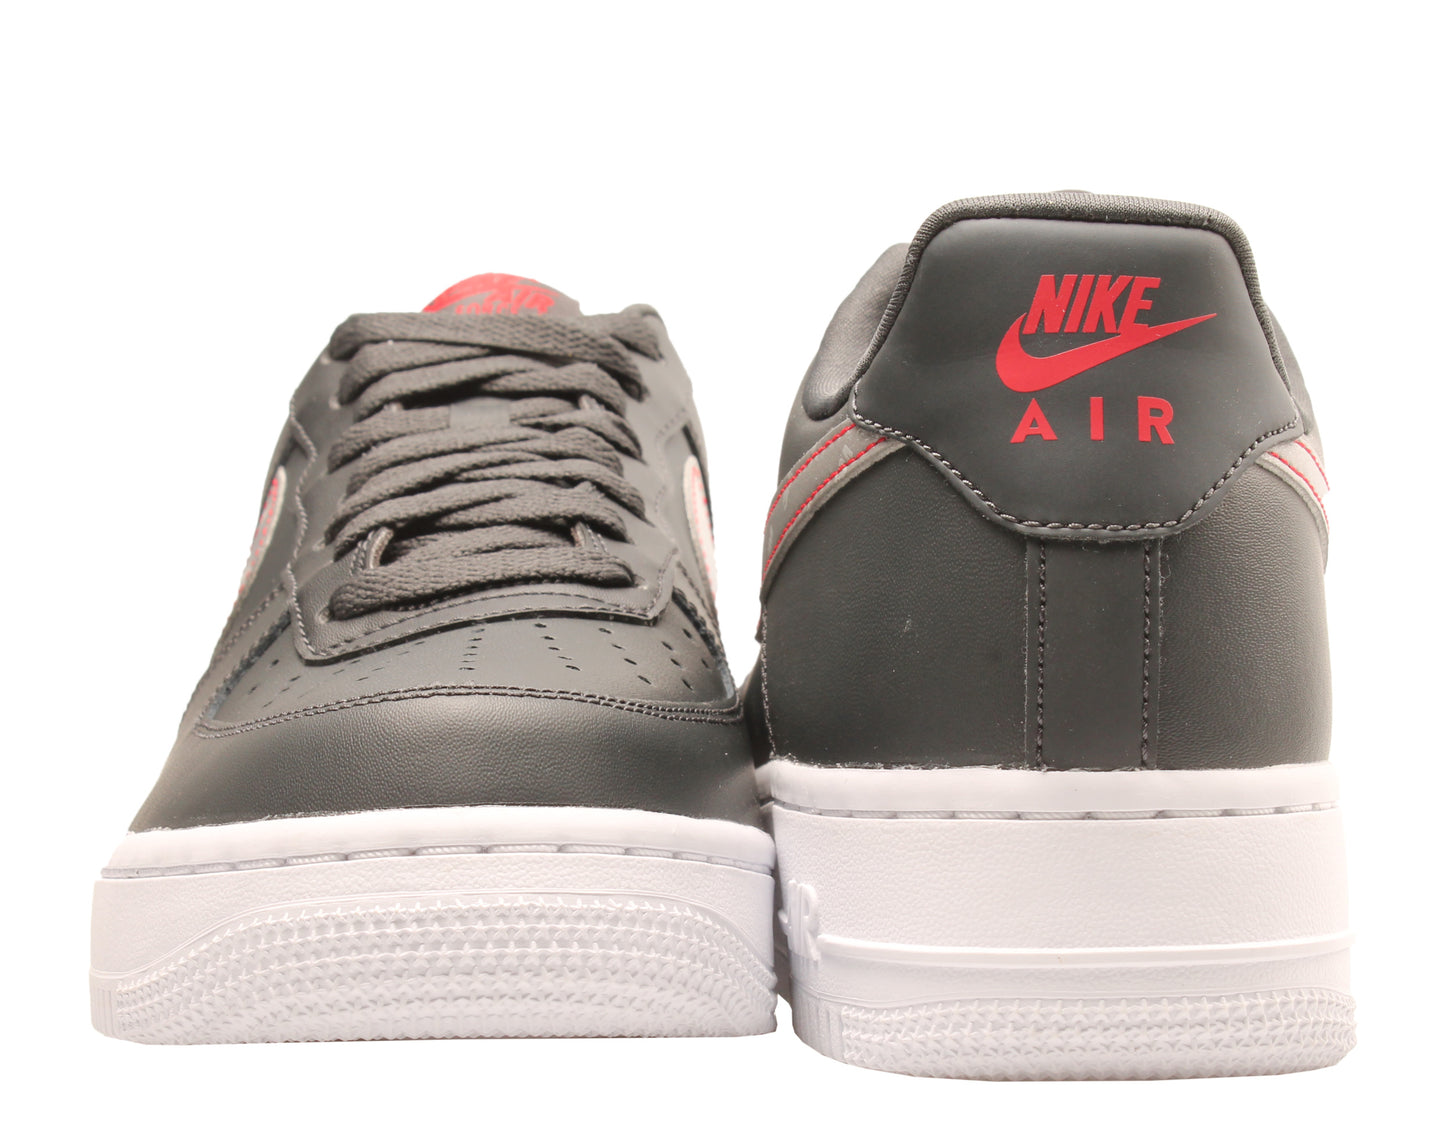 Nike Air Force 1 '07 3M Men's Basketball Shoes